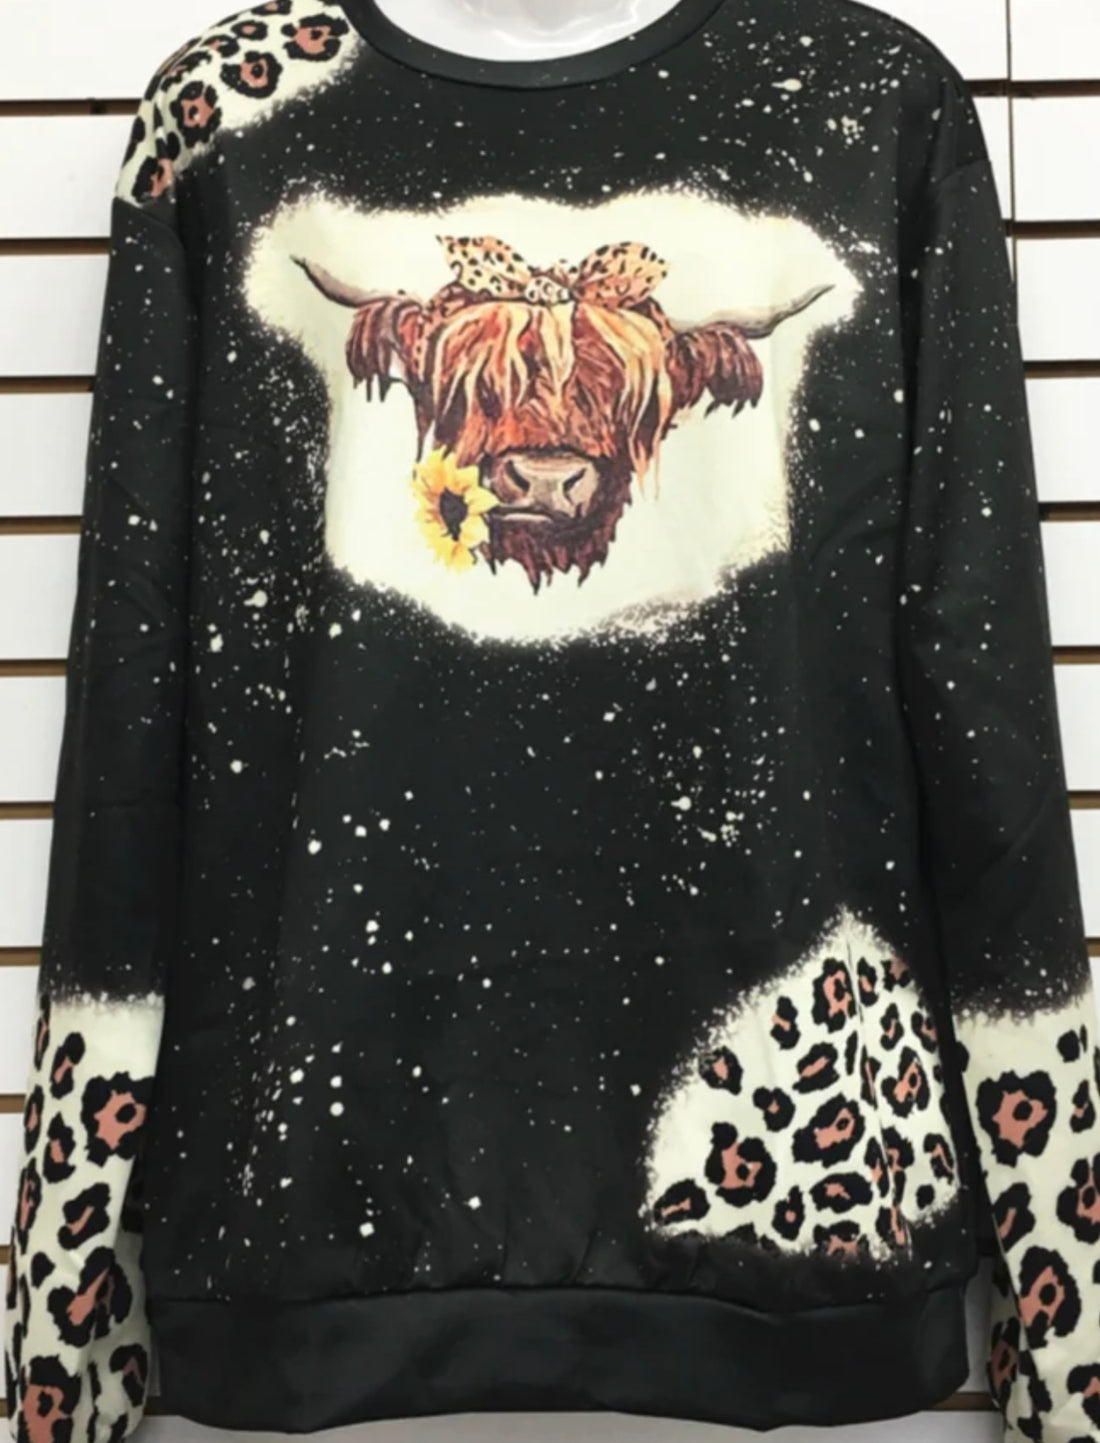 Black Bleached Long Sleeve Shirt with Leopard Print and Highland Cow